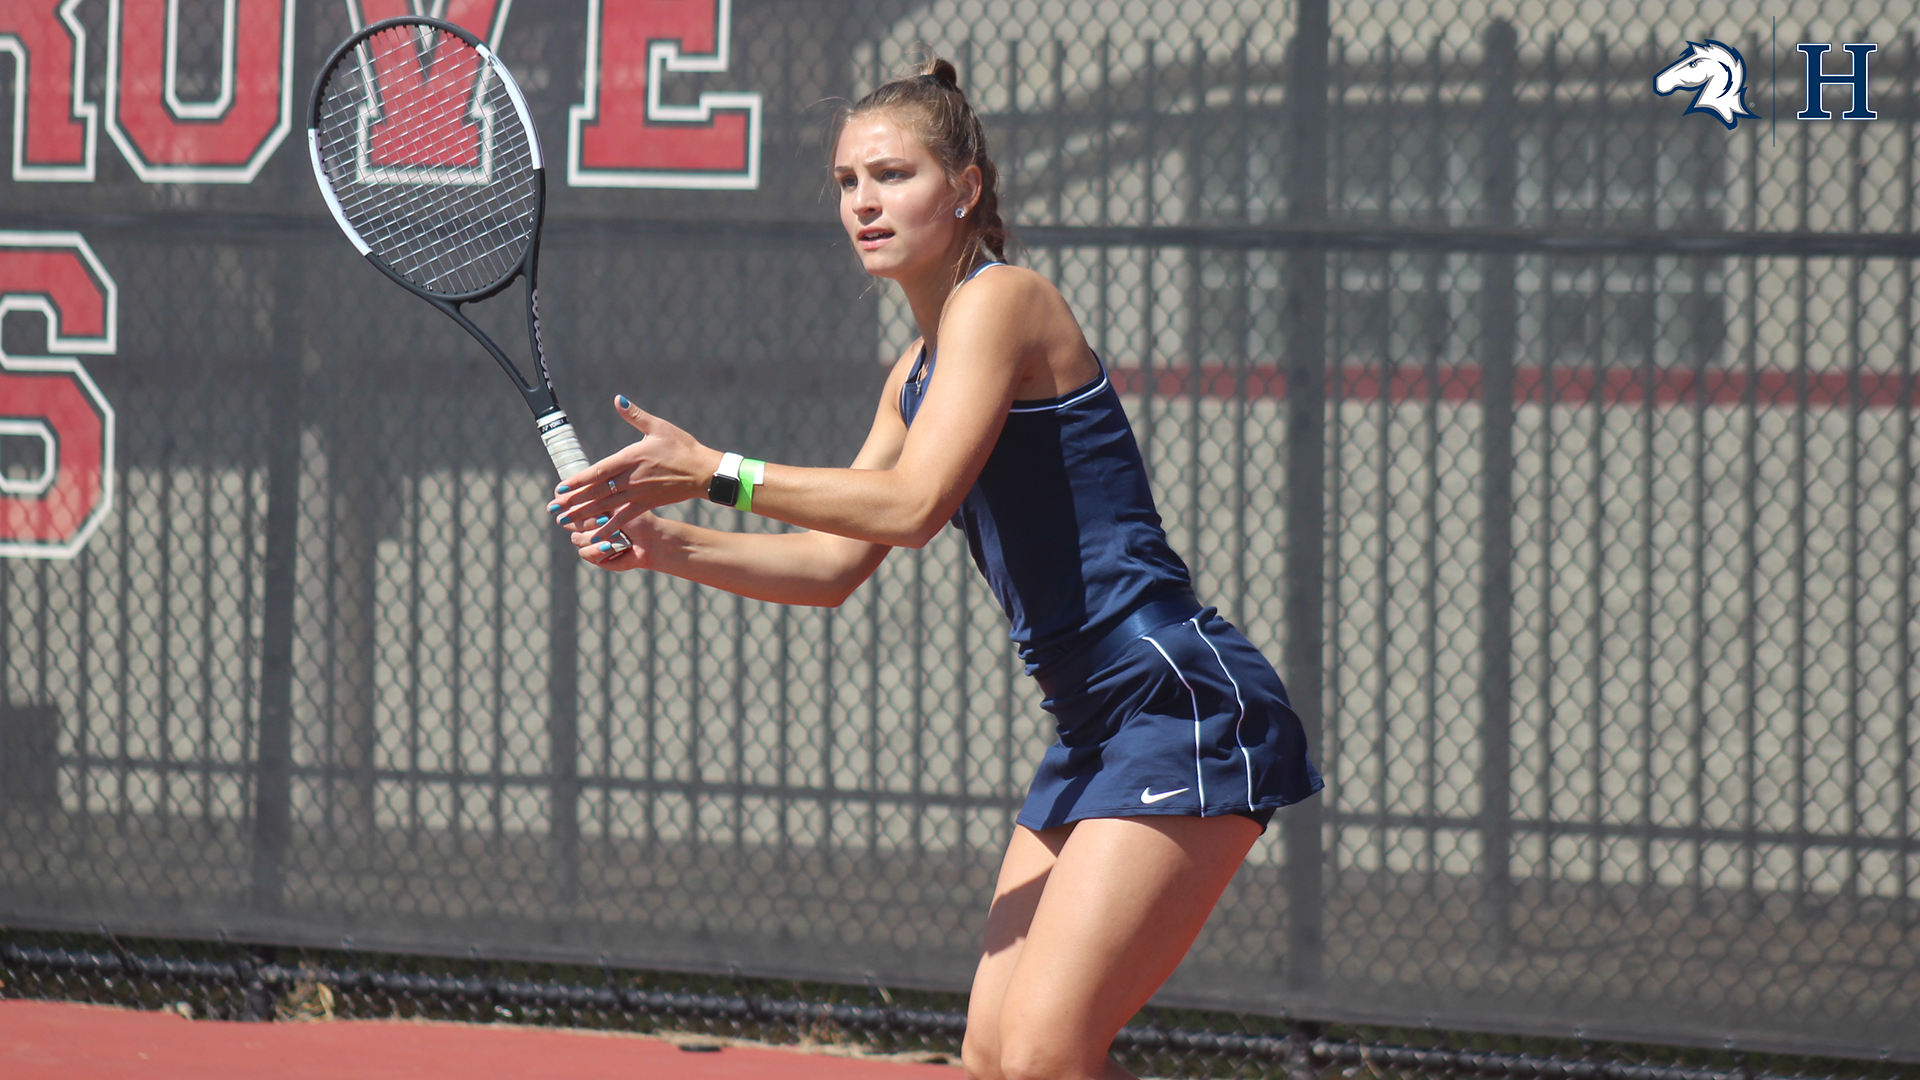 Charger women's tennis team falls to Findlay in road match, 4-2